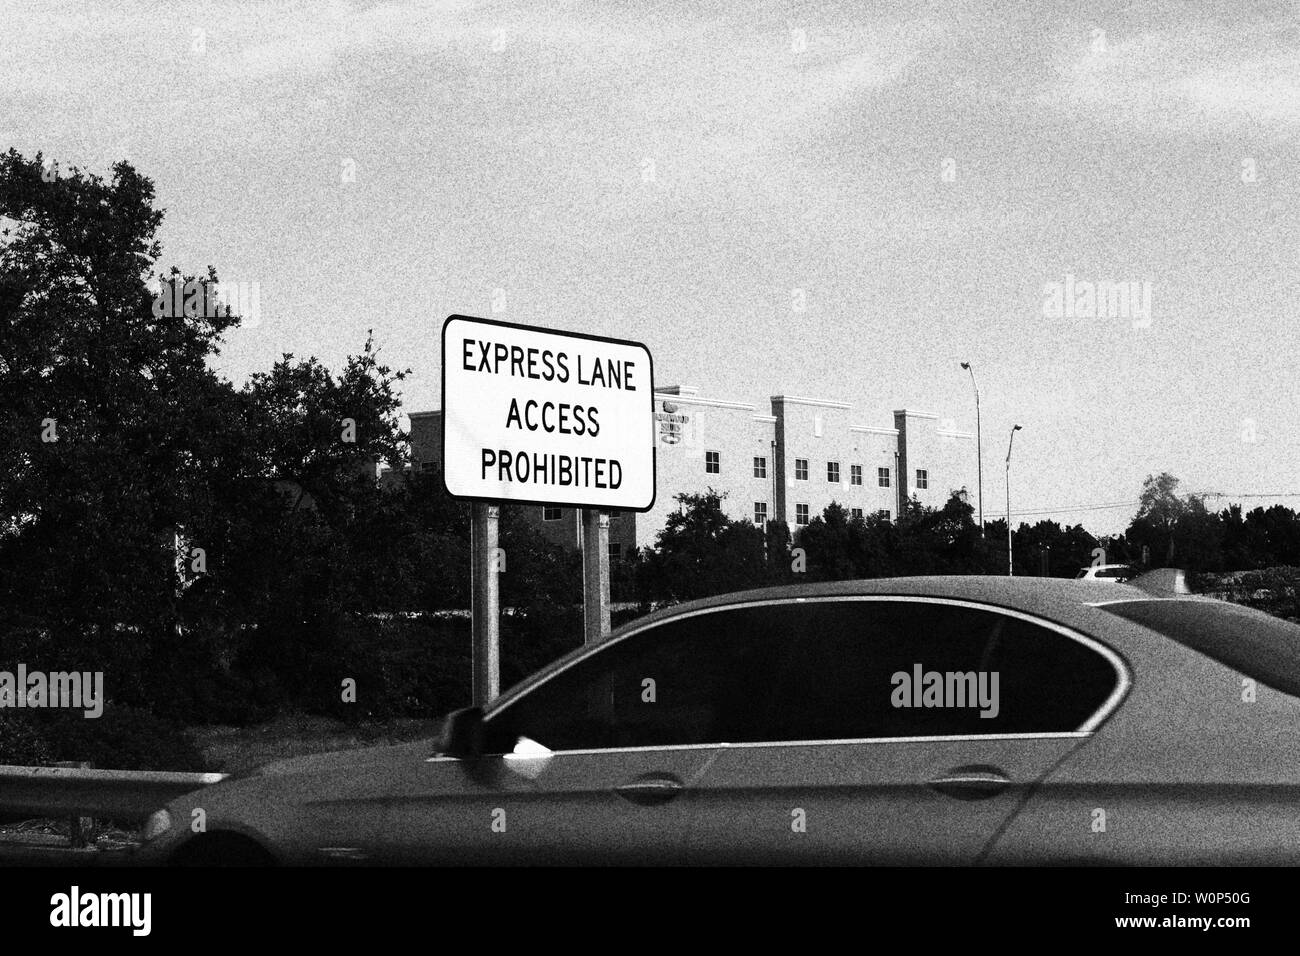 Express lane access prohibited sign black and white photograph Stock Photo